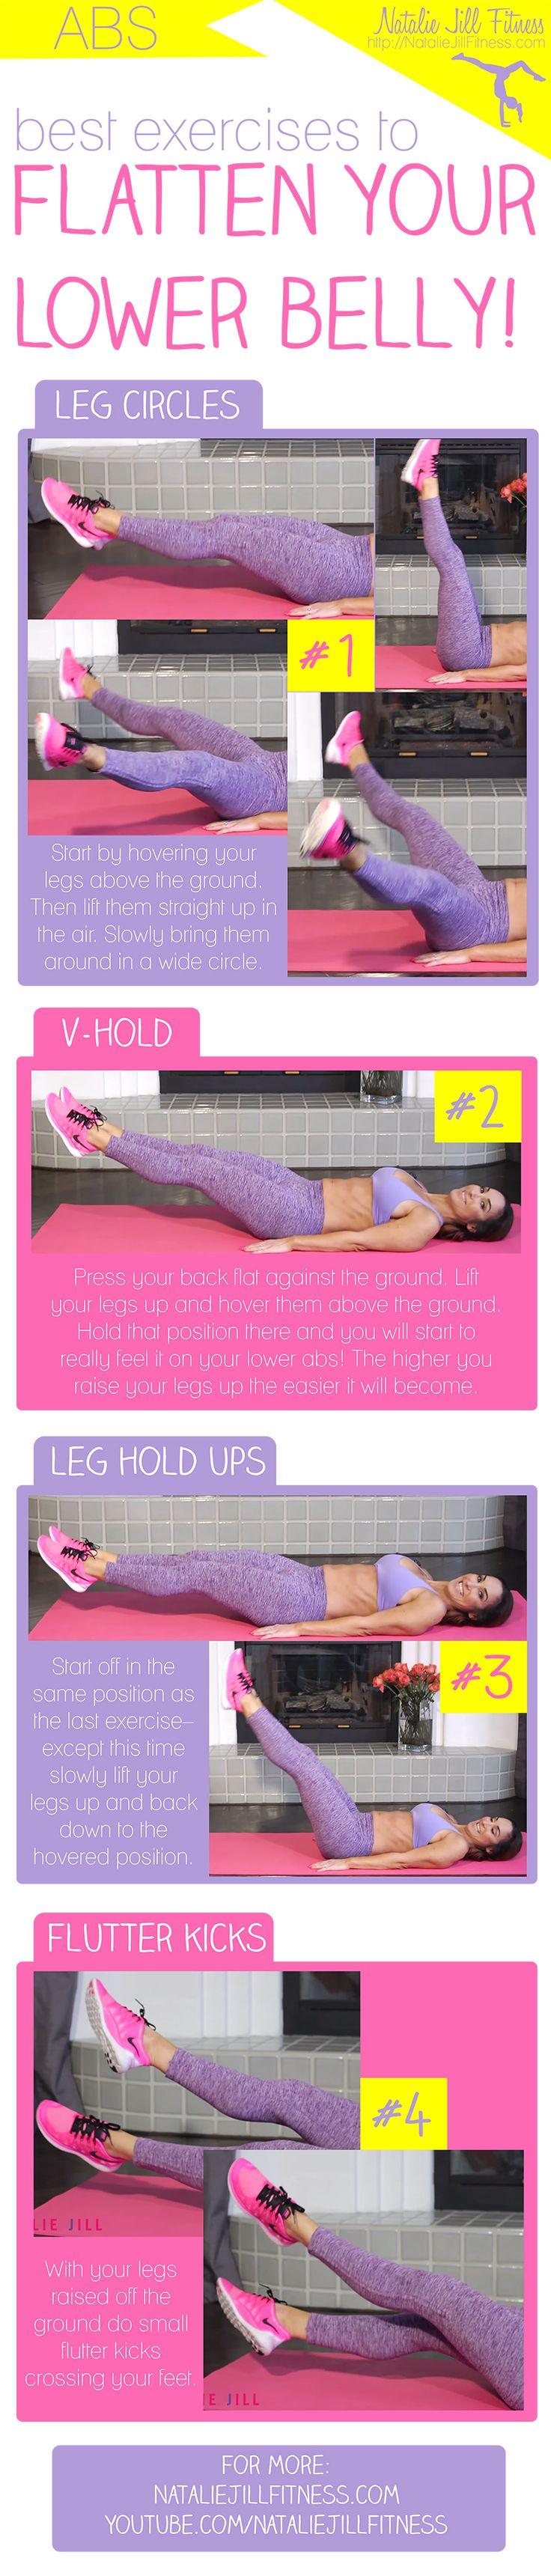 printable-workout-cards-from-natalie-jill-fitness-2546421-weddbook